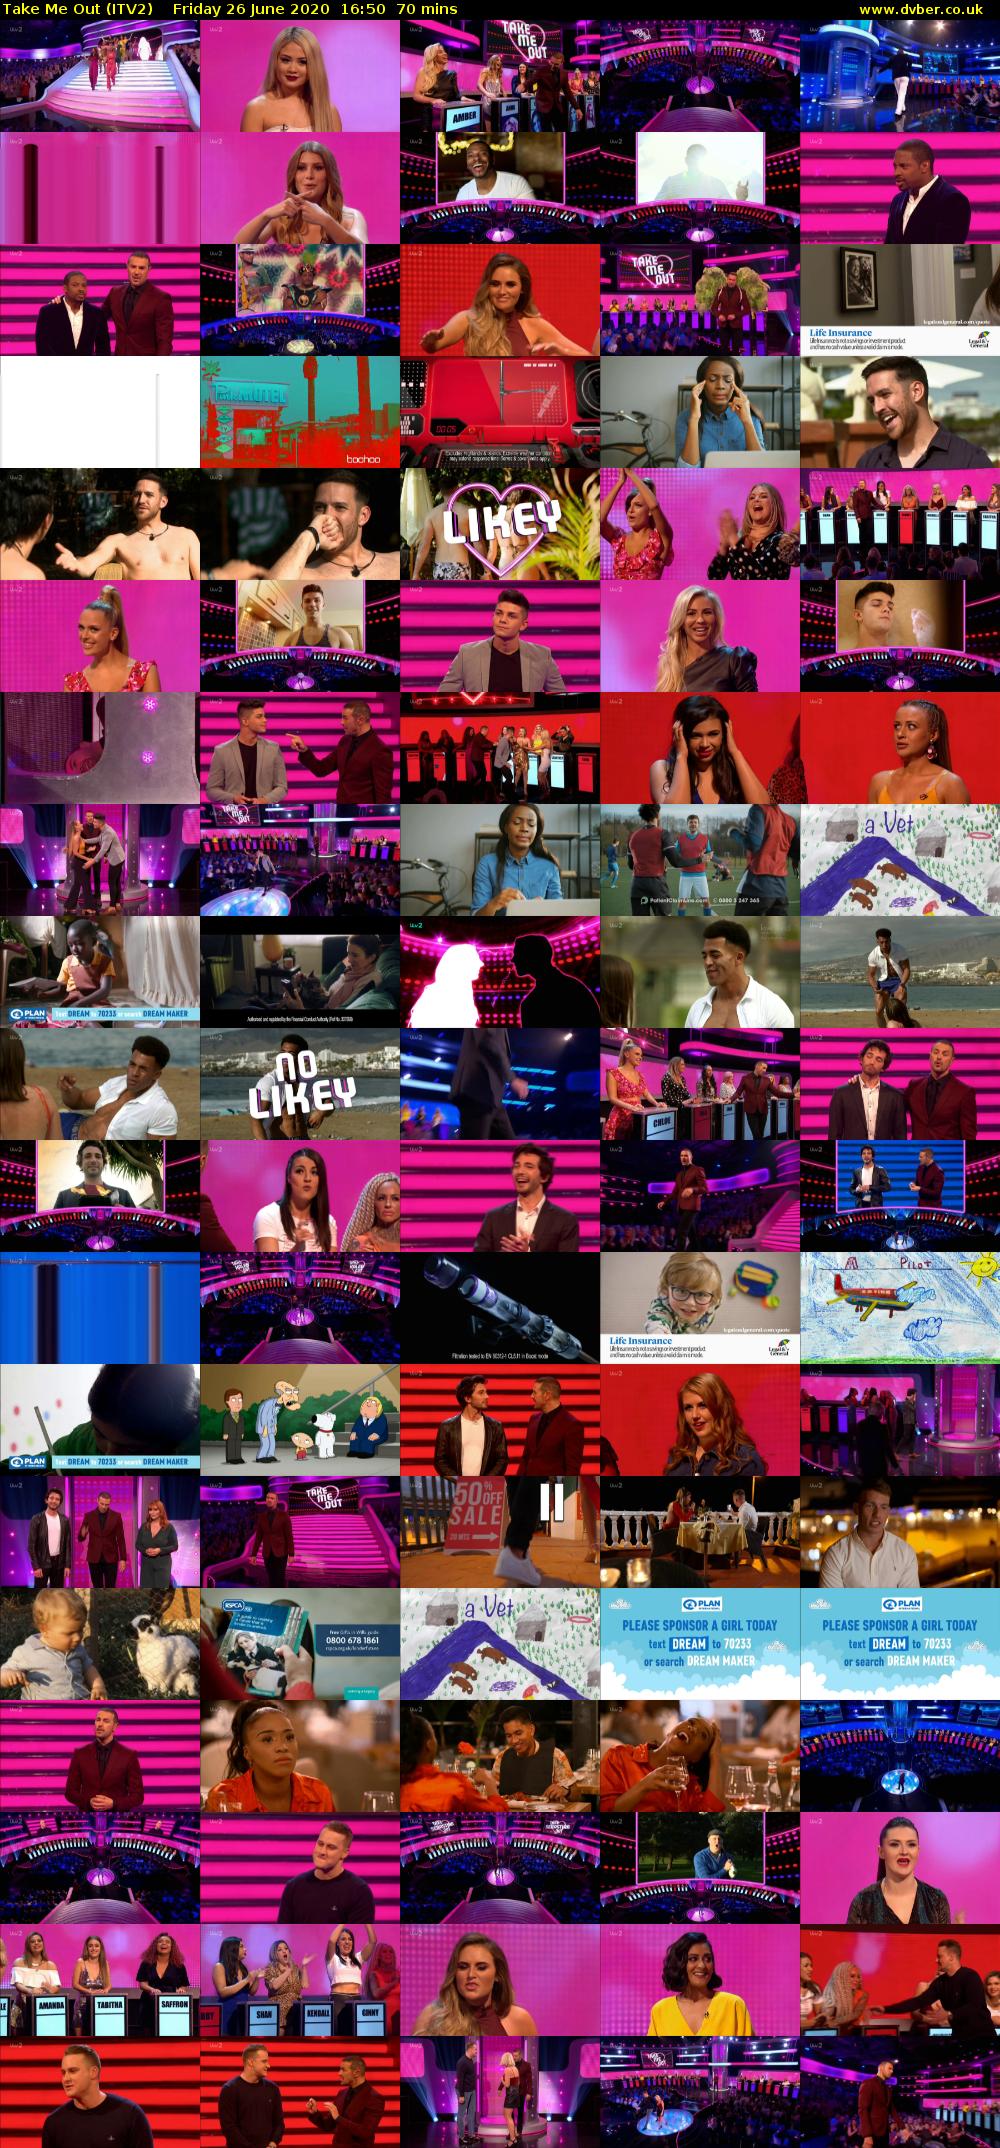 Take Me Out (ITV2) Friday 26 June 2020 16:50 - 18:00